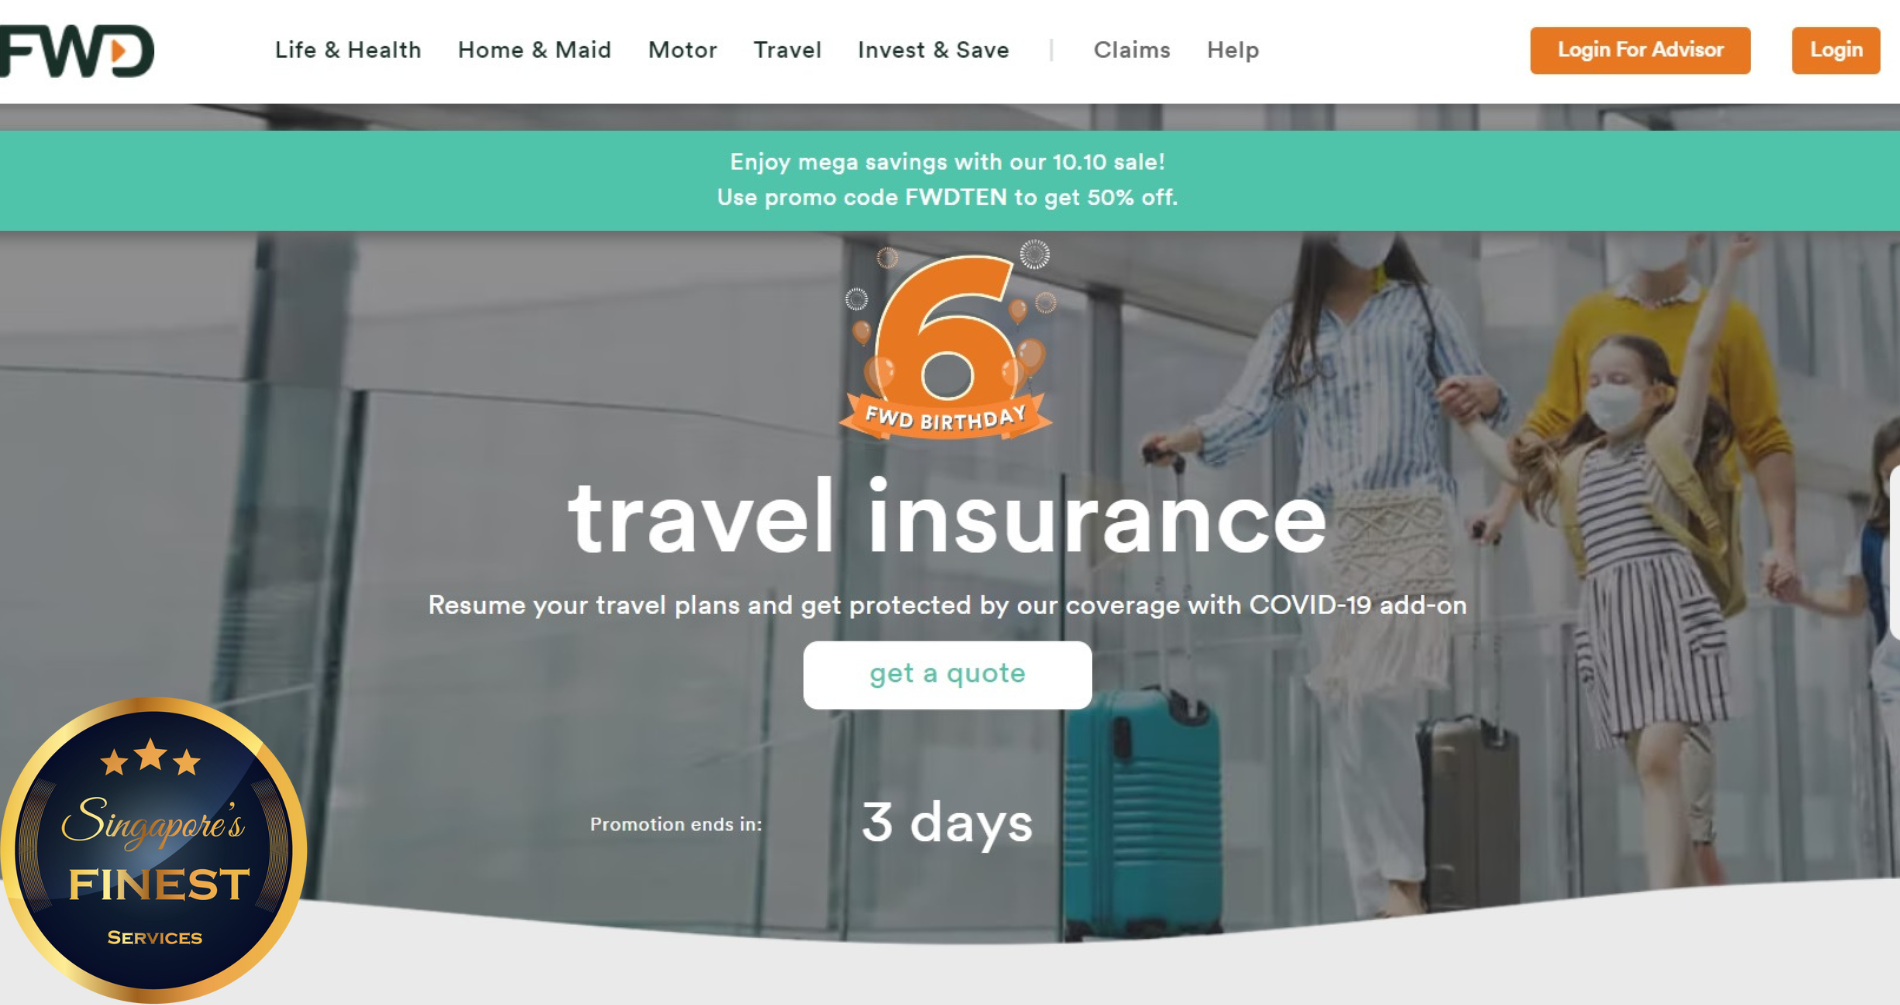 The Finest Travel Insurance in Singapore